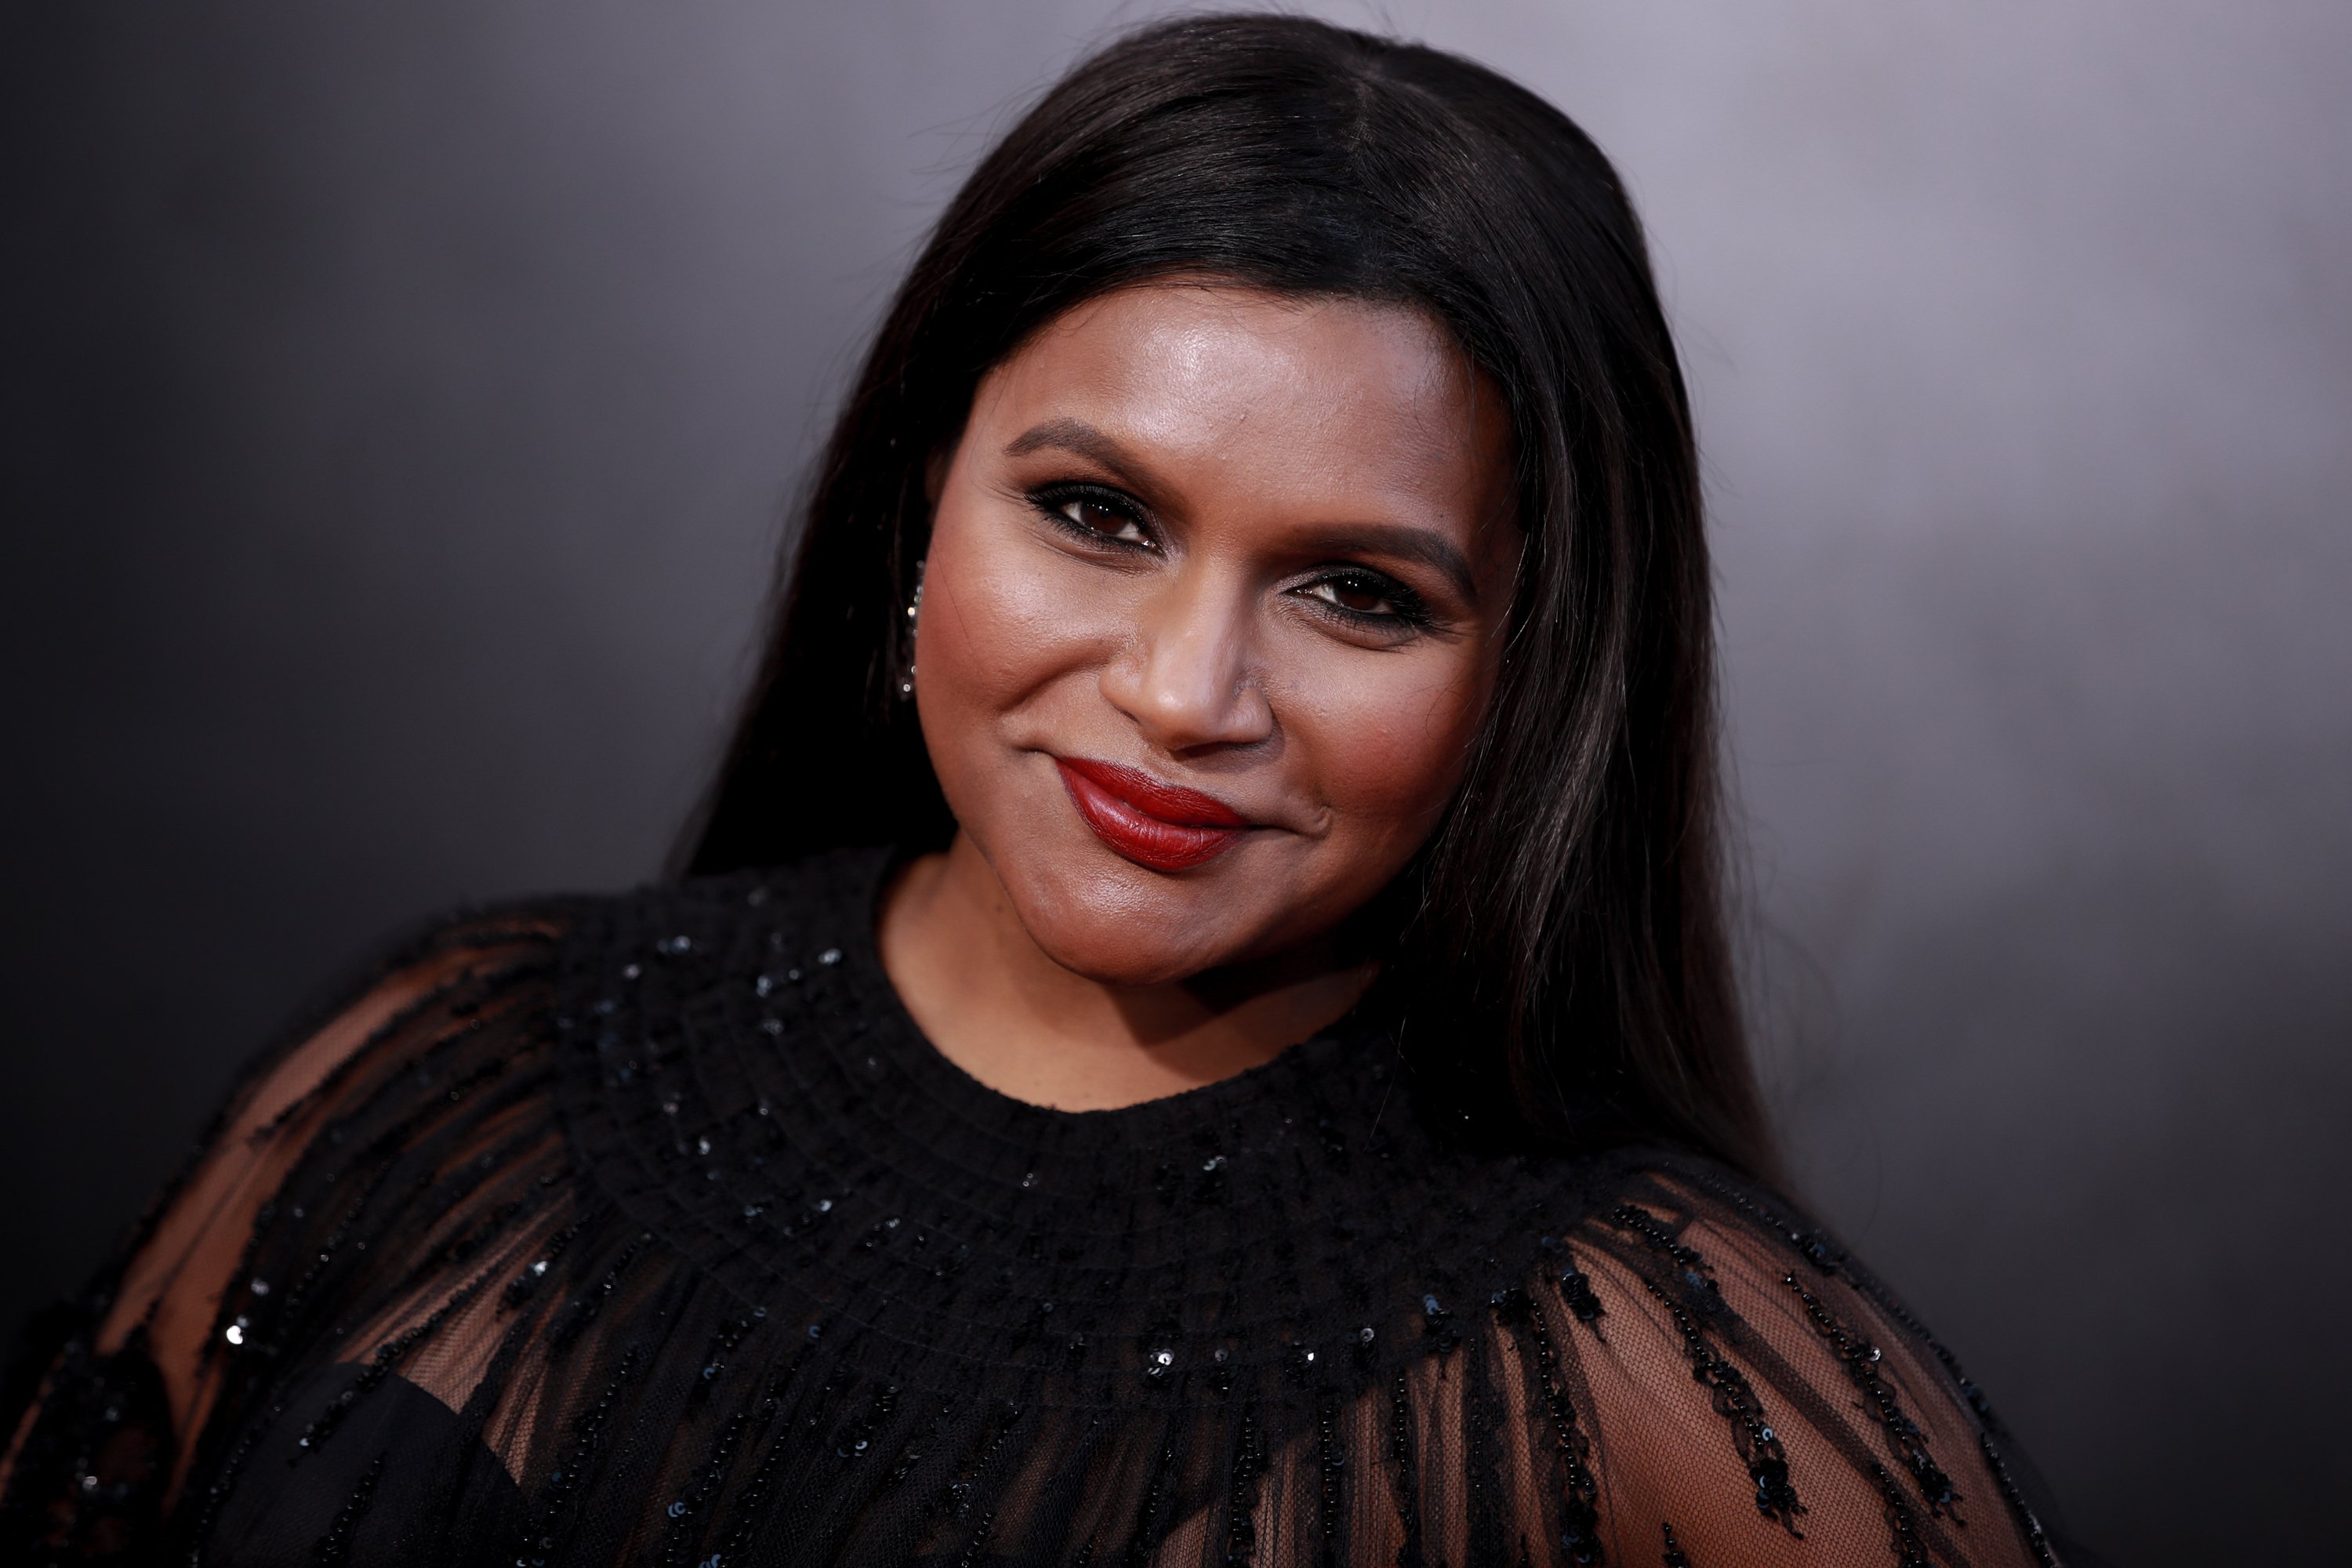 Mindy Kaling attends the premiere of Amazon Studio's 'Late Night' at The Orpheum Theatre on May 30, 2019